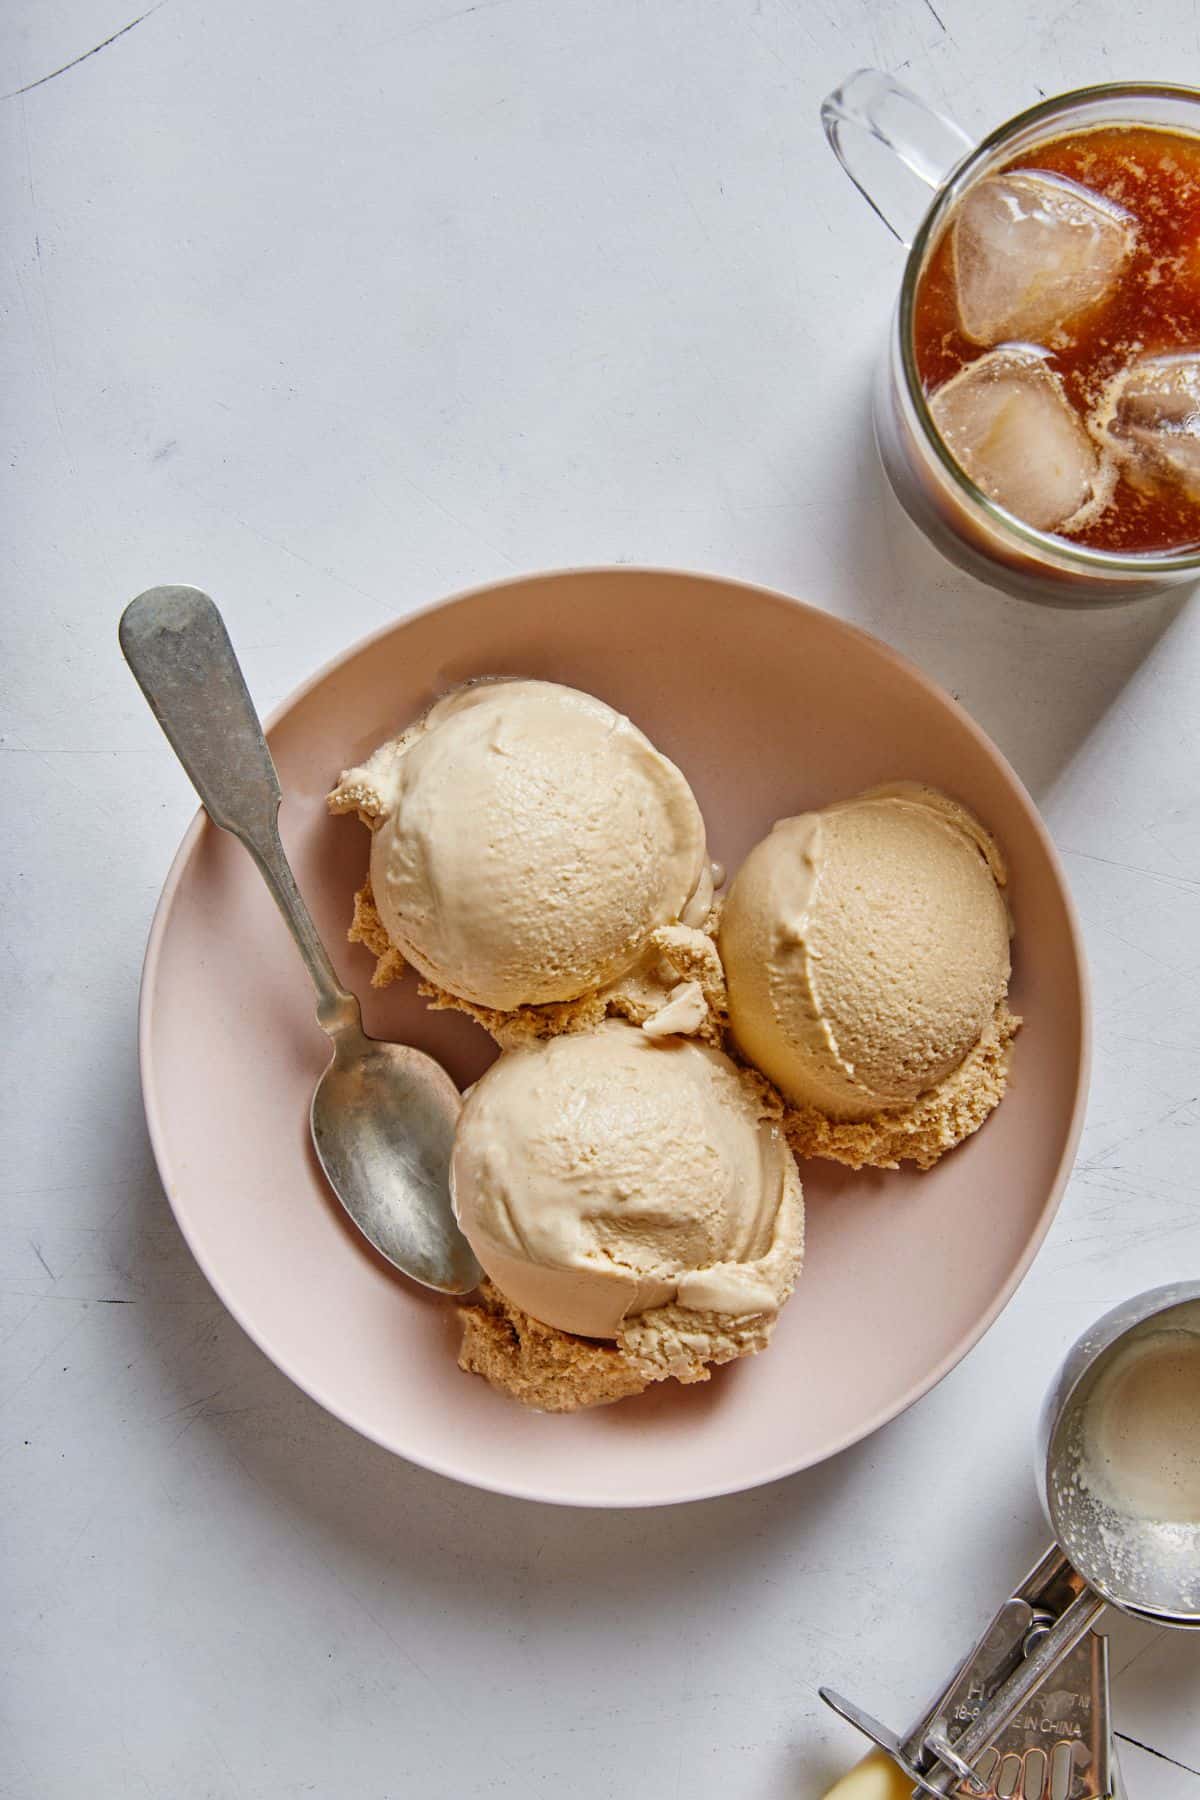 Three scoops of ice cream on top of a plate with a spoon and a glass of coffee and an ice cream scoop beside it